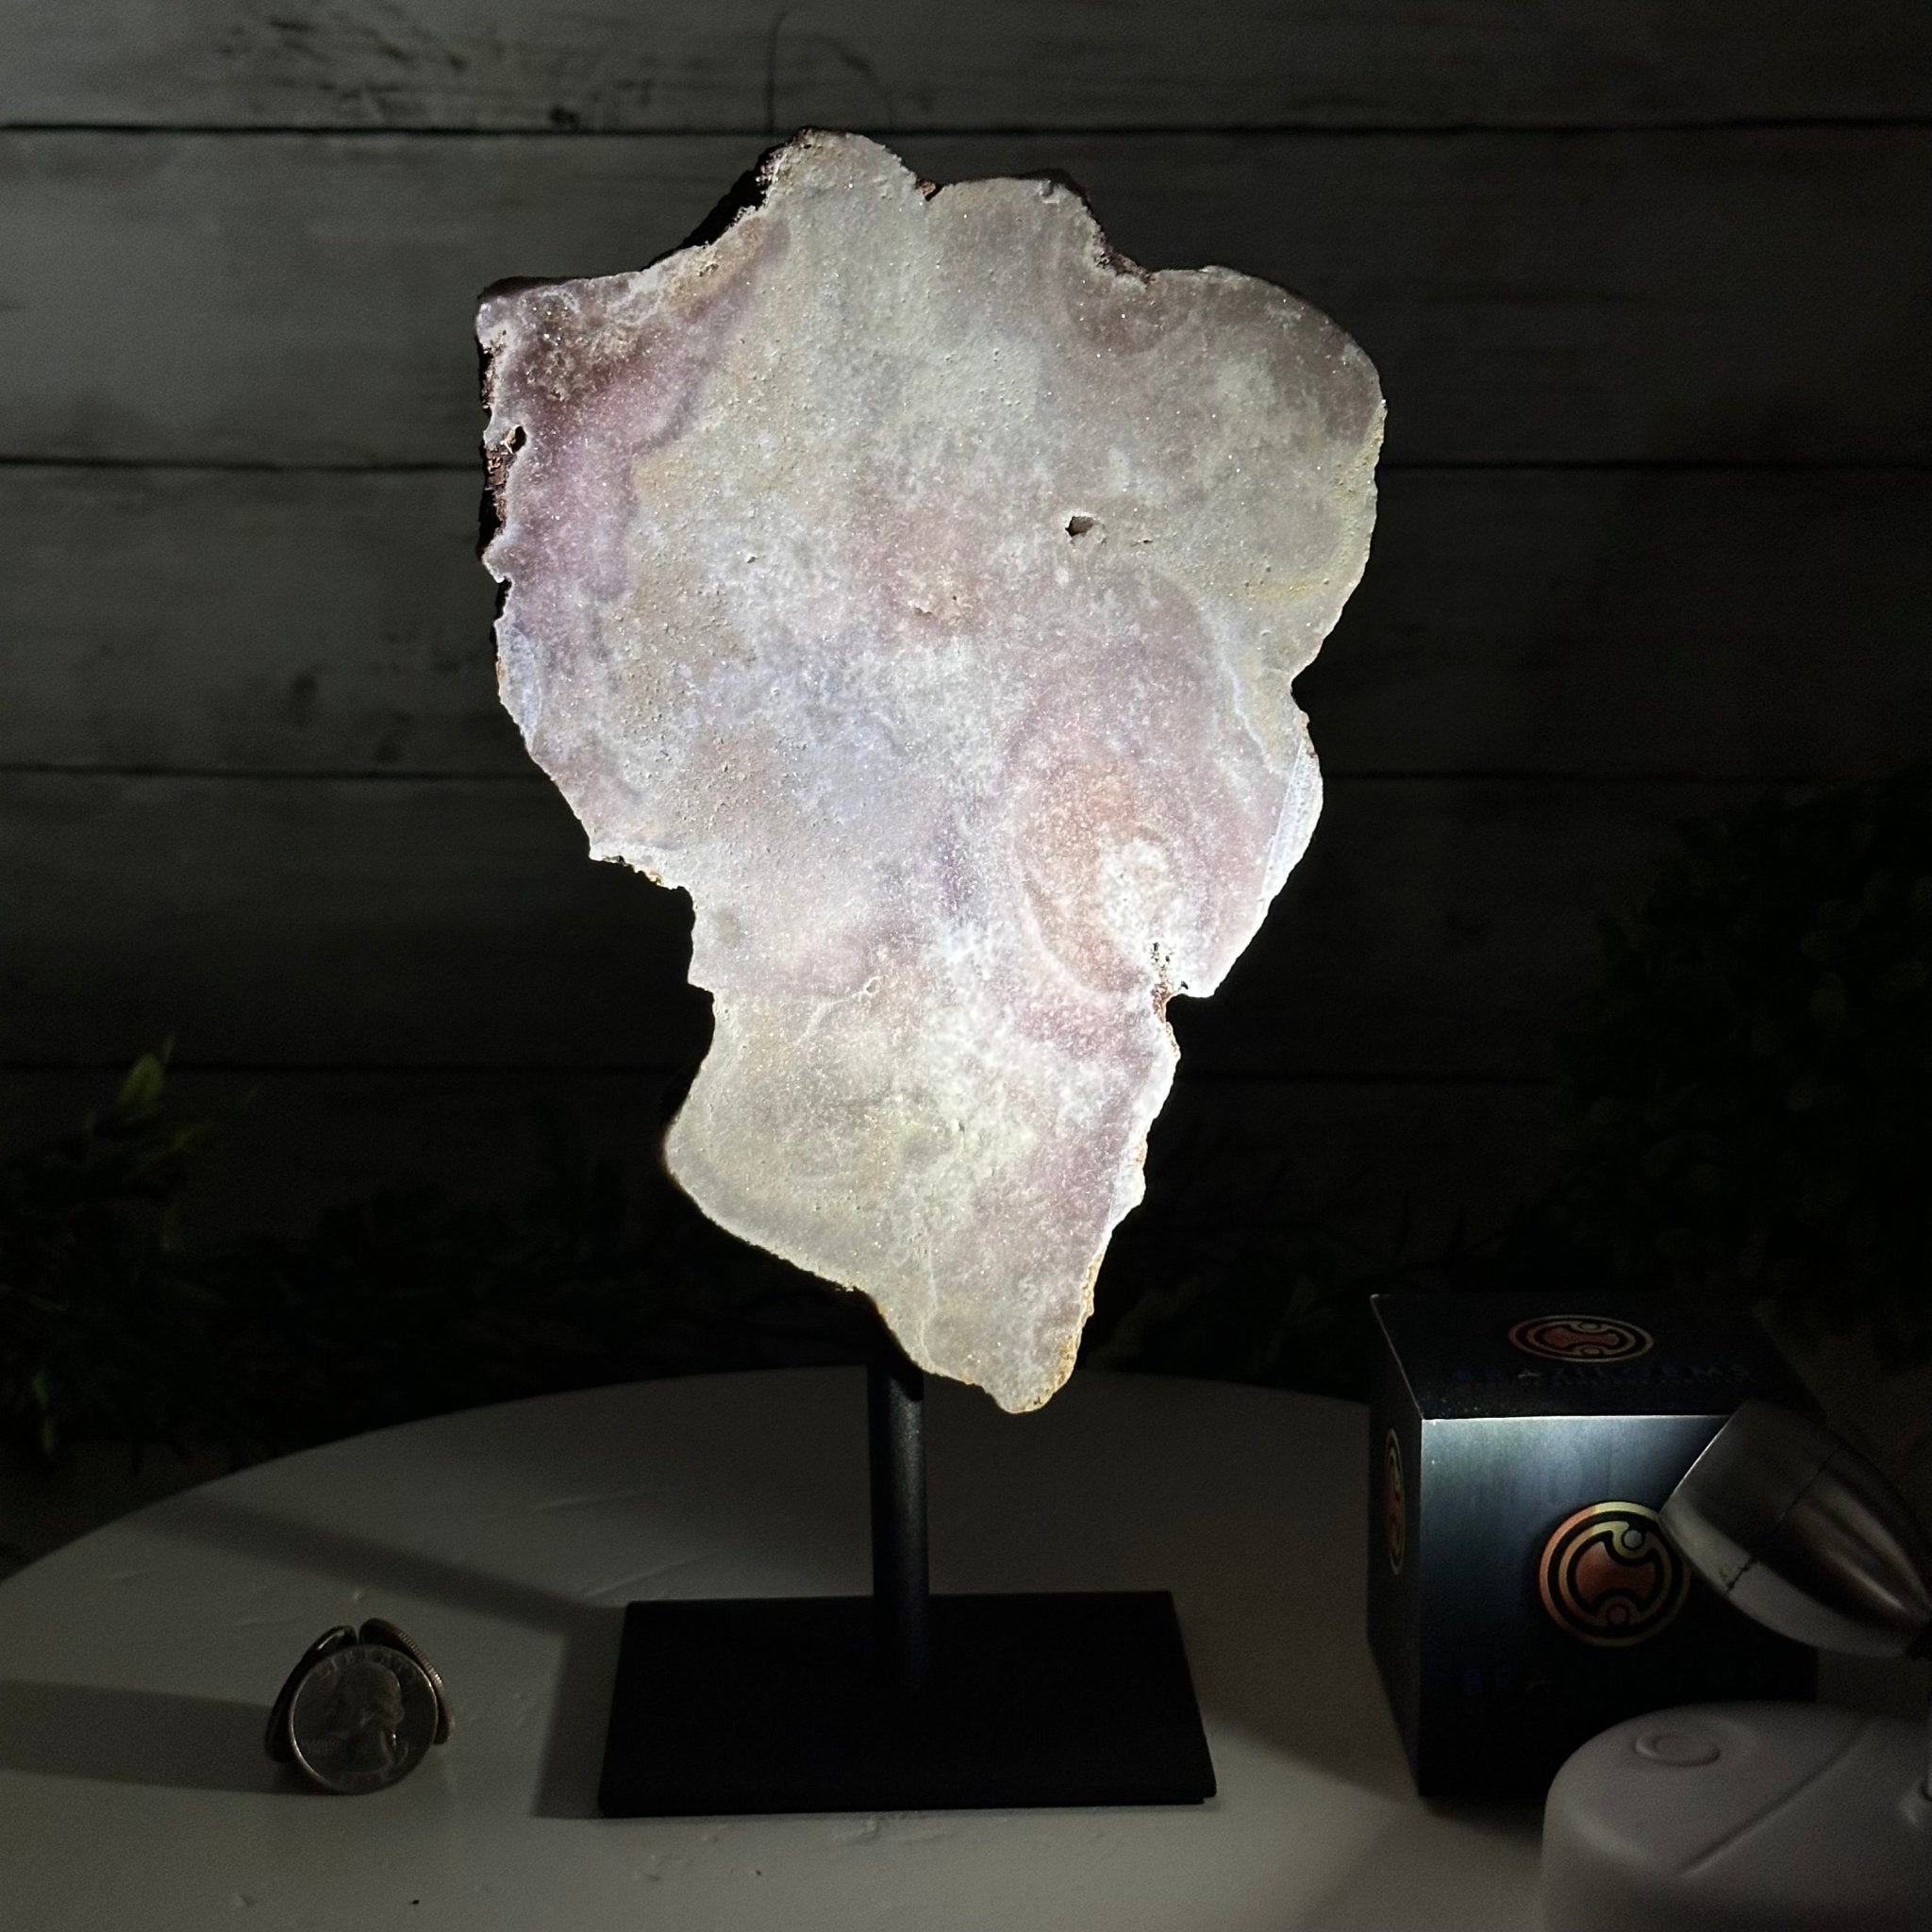 Pink Amethyst Slice on a Stand, 2.2 lbs and 10.5" Tall #5742-0126 - Brazil GemsBrazil GemsPink Amethyst Slice on a Stand, 2.2 lbs and 10.5" Tall #5742-0126Slices on Fixed Bases5742-0126